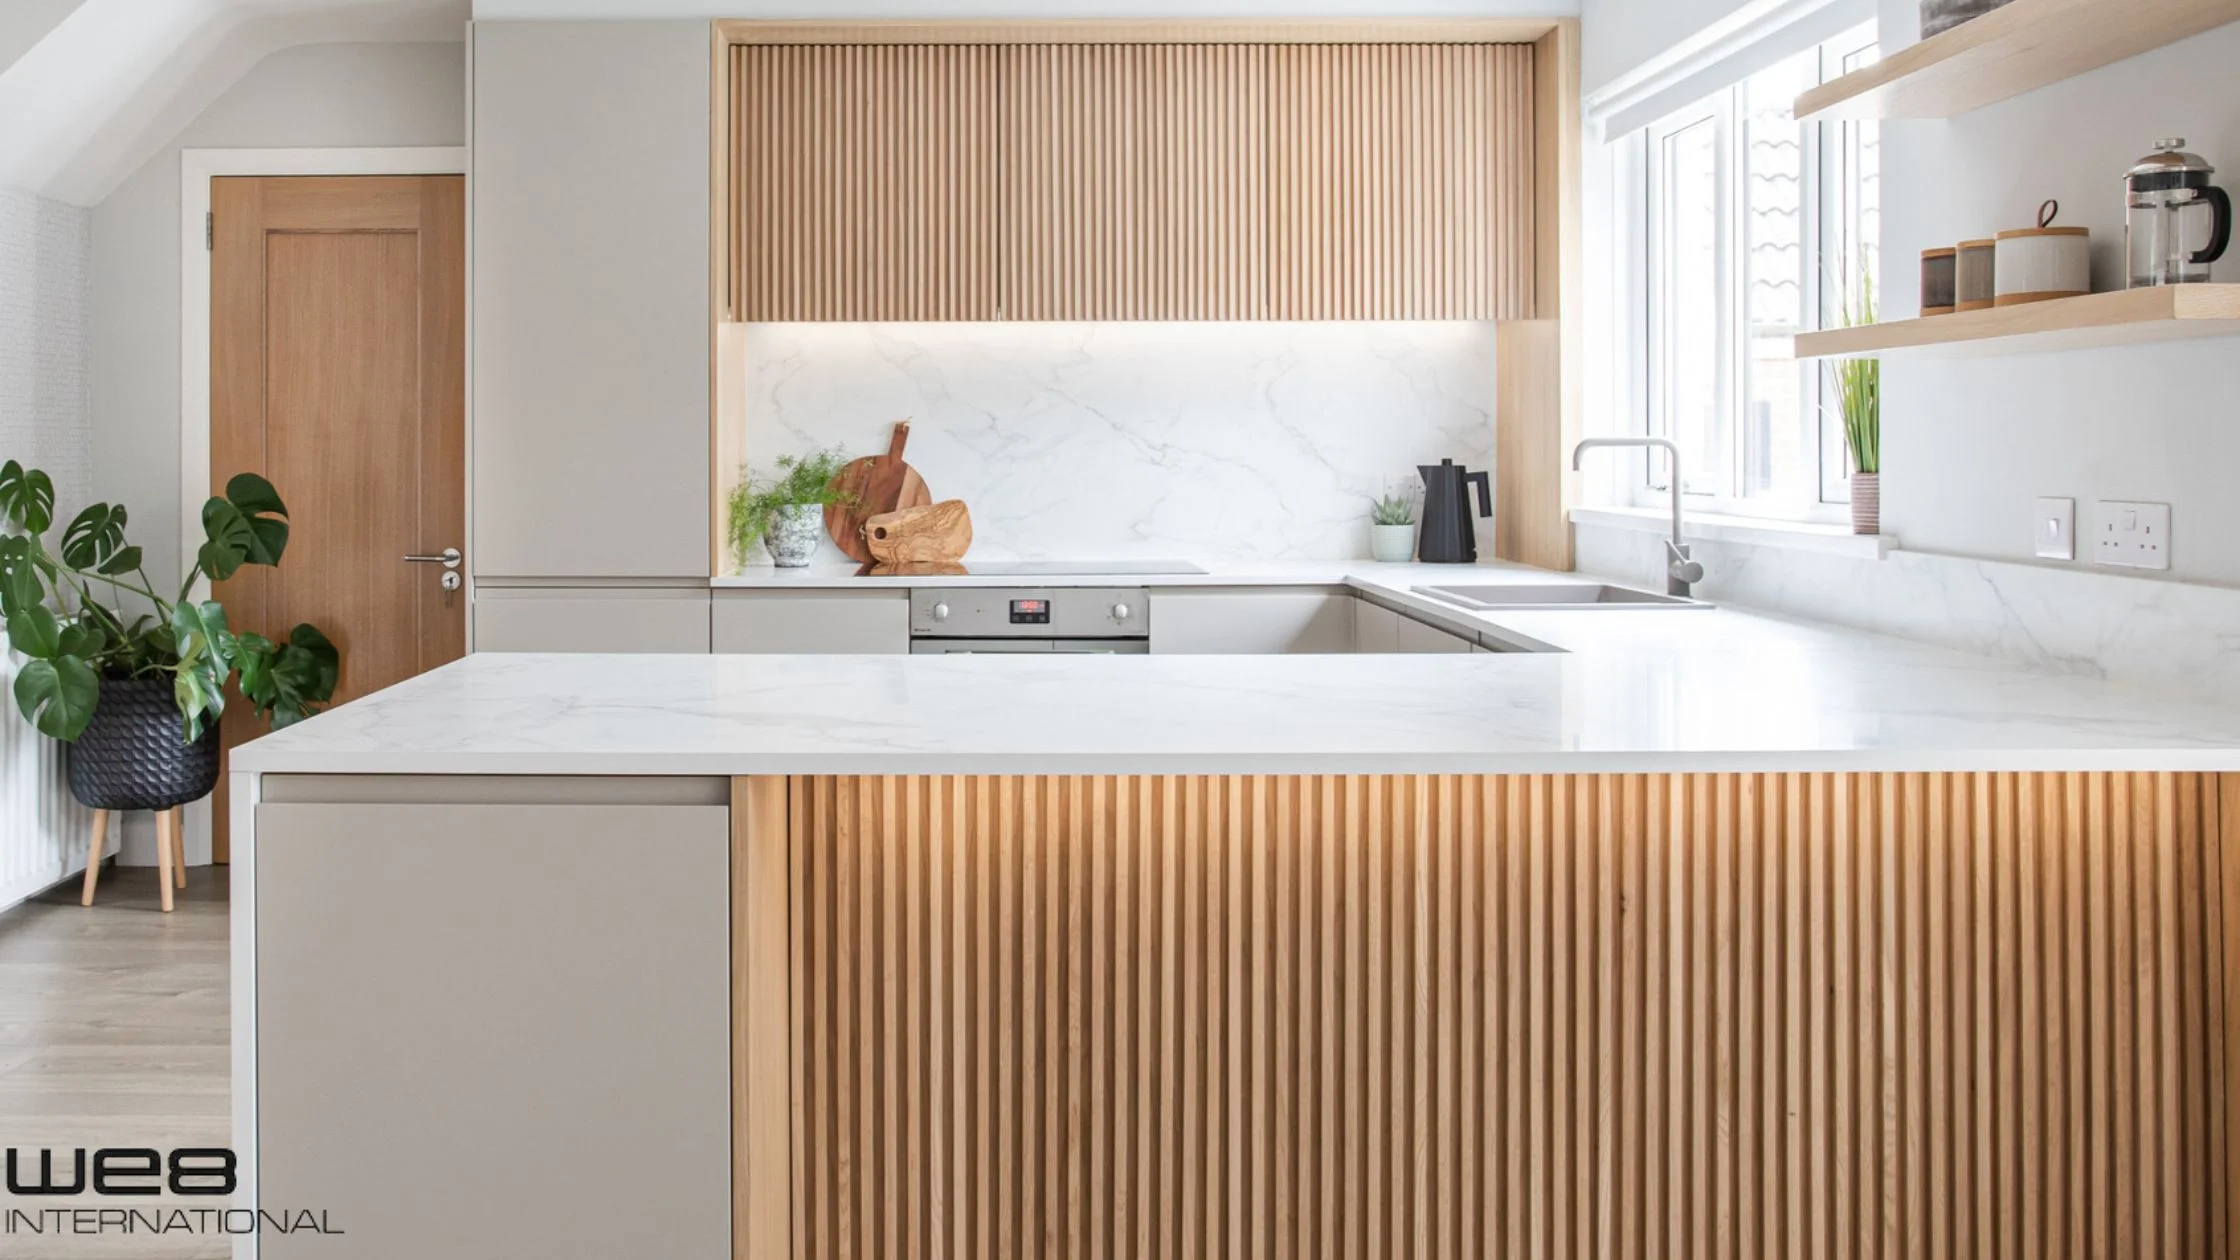 Using Wooden Strips for Accent Walls in the Kitchen